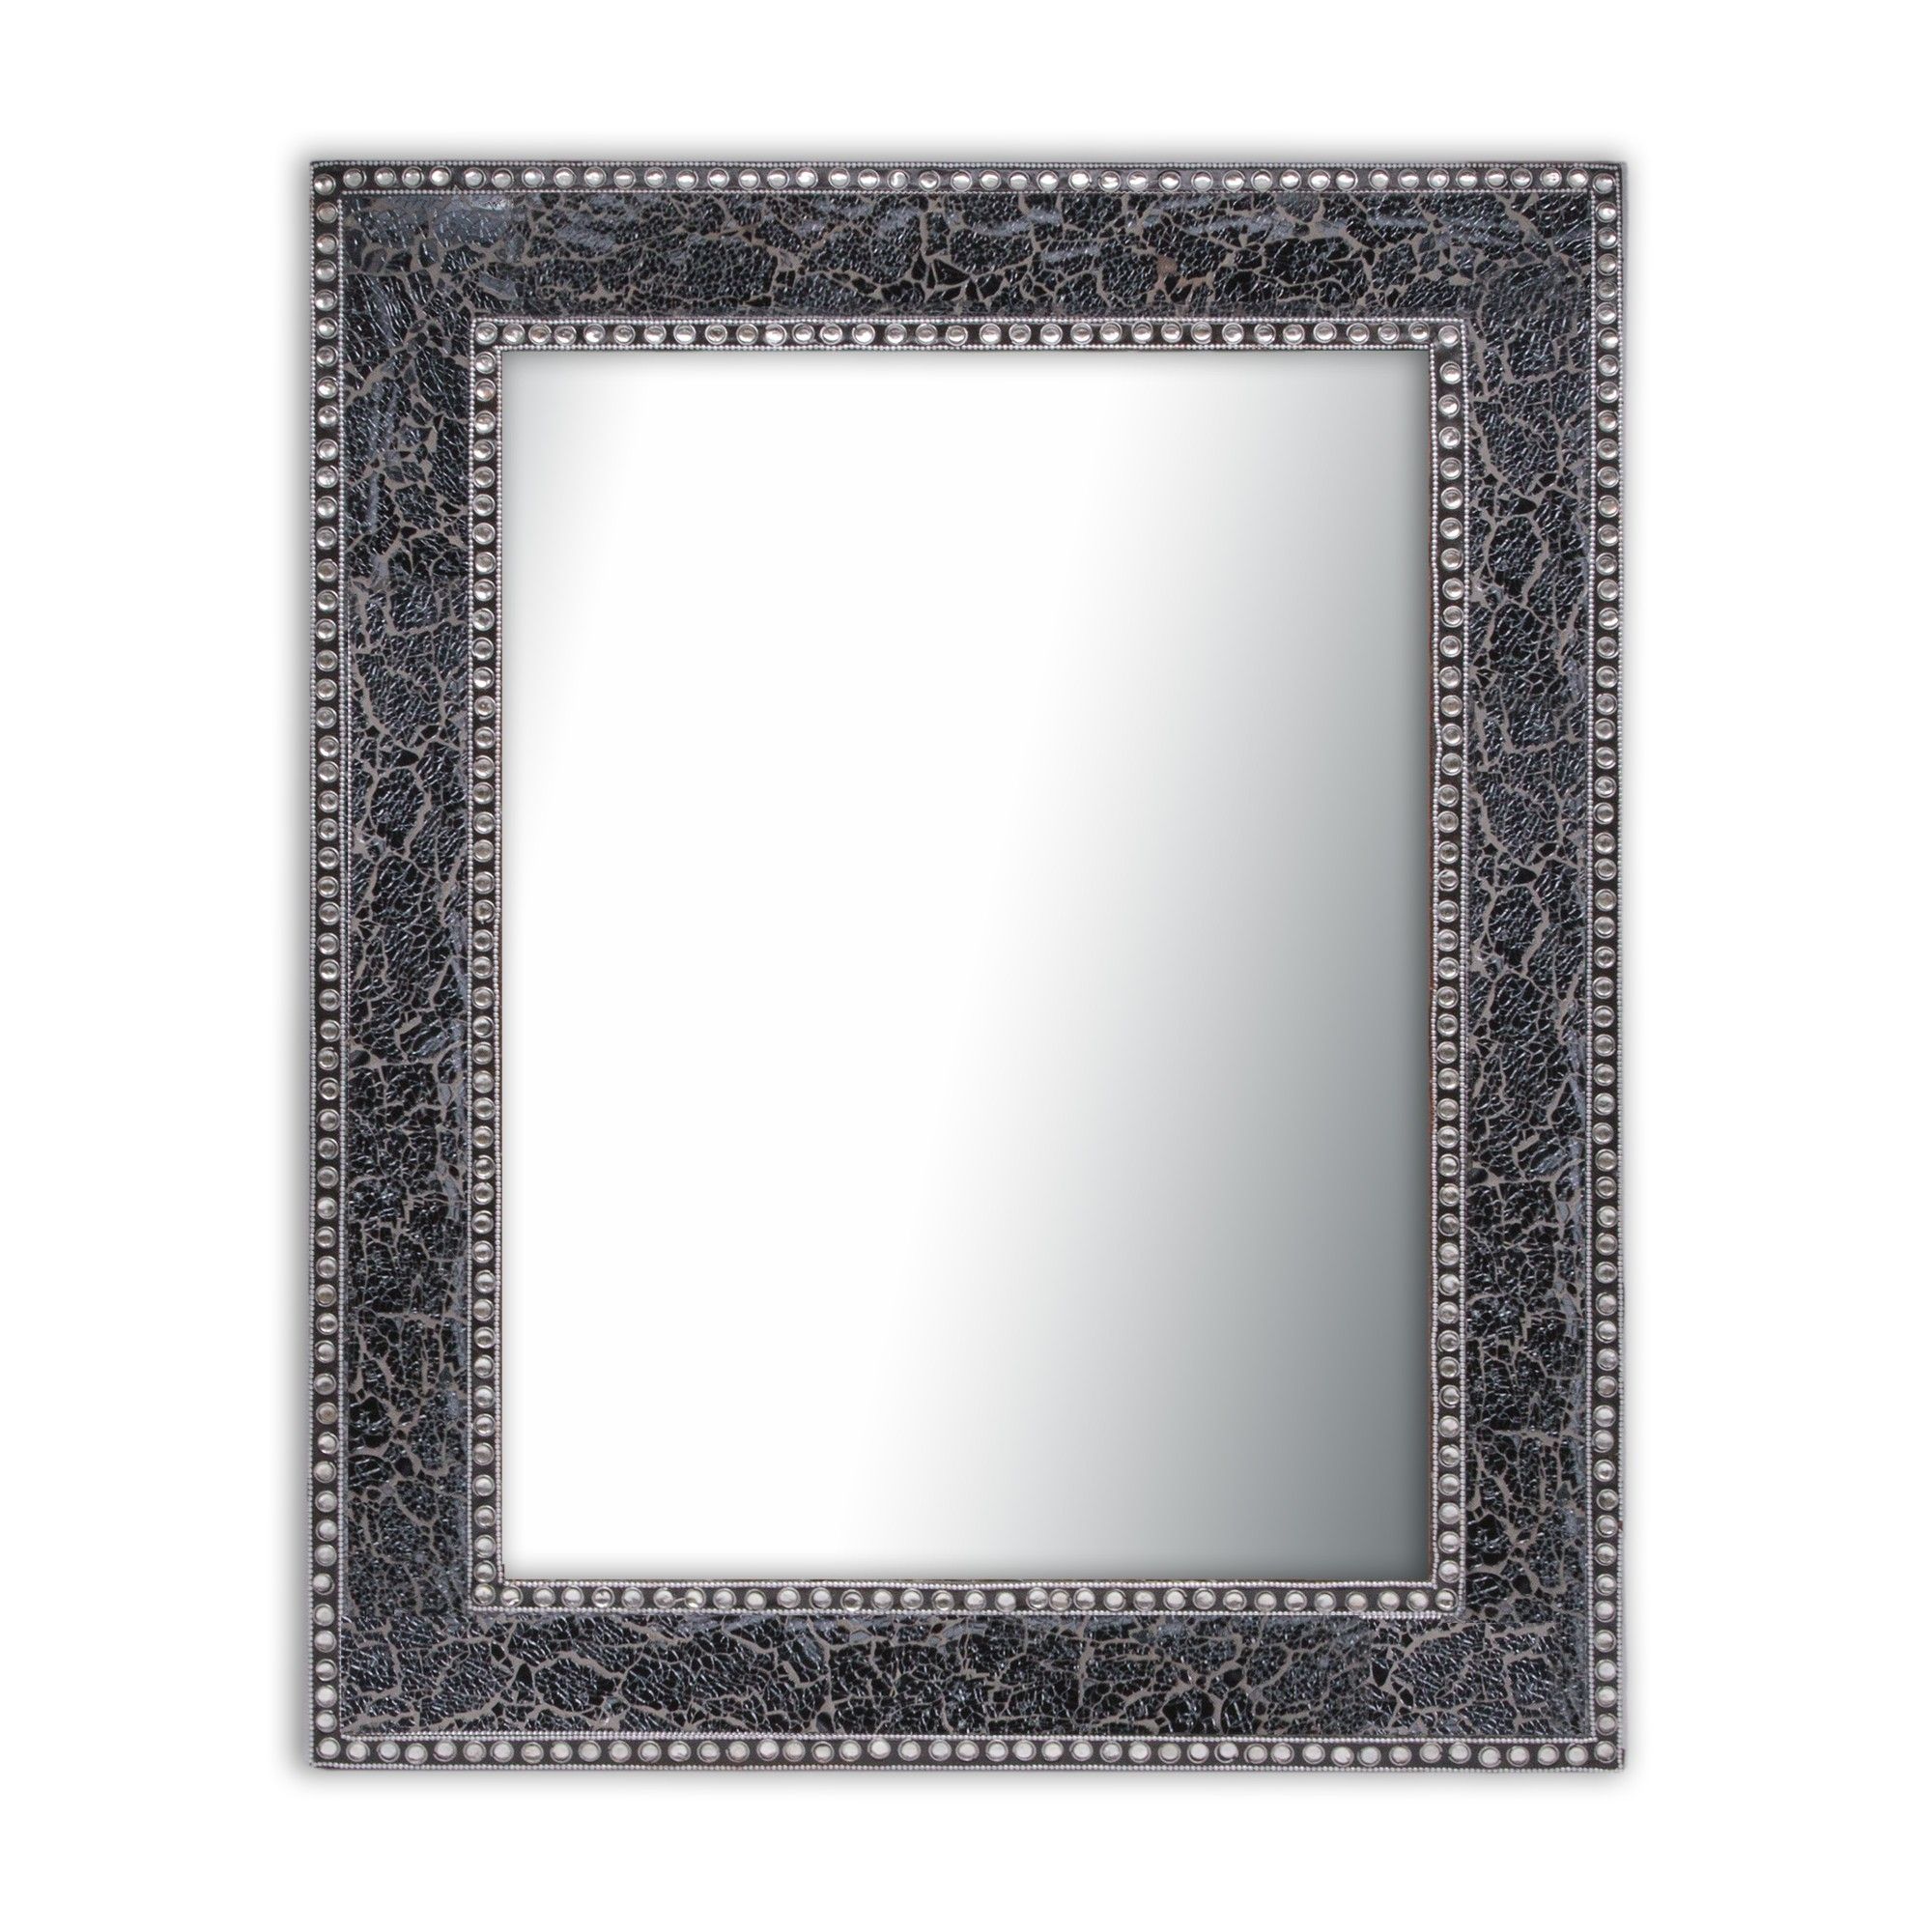 Buy 30"x24" Black/gray Crackled Glass Decorative Wall Mirror Within Round Eclectic Accent Mirrors (View 28 of 30)